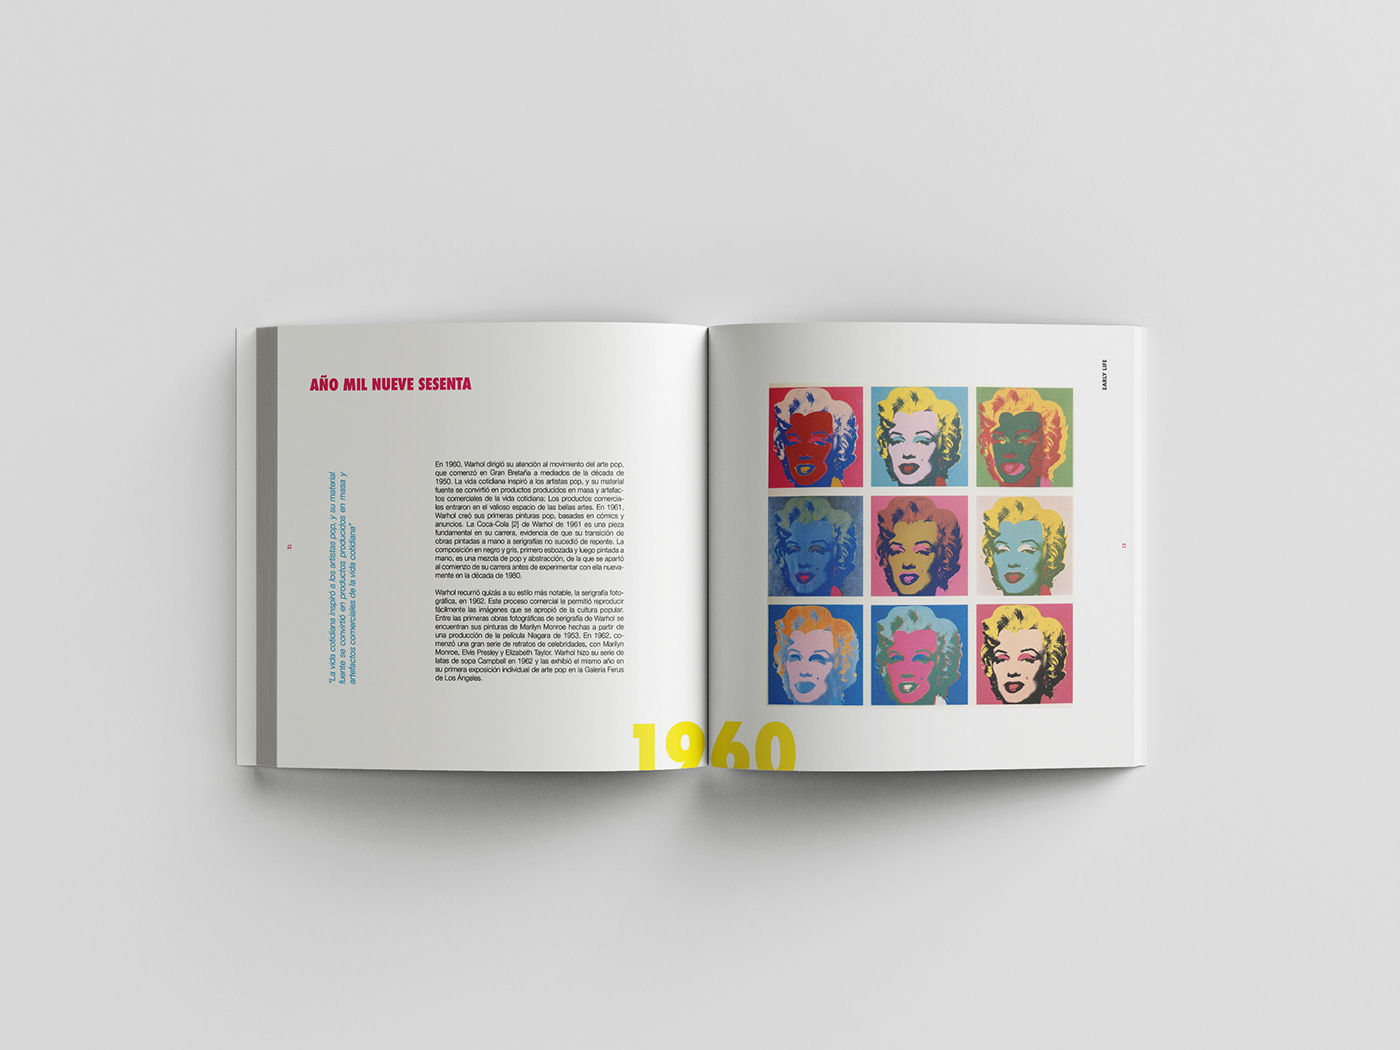 andy wahorl's book Andy Warhol book book design design Diseño editorial editorial Free style InDesign